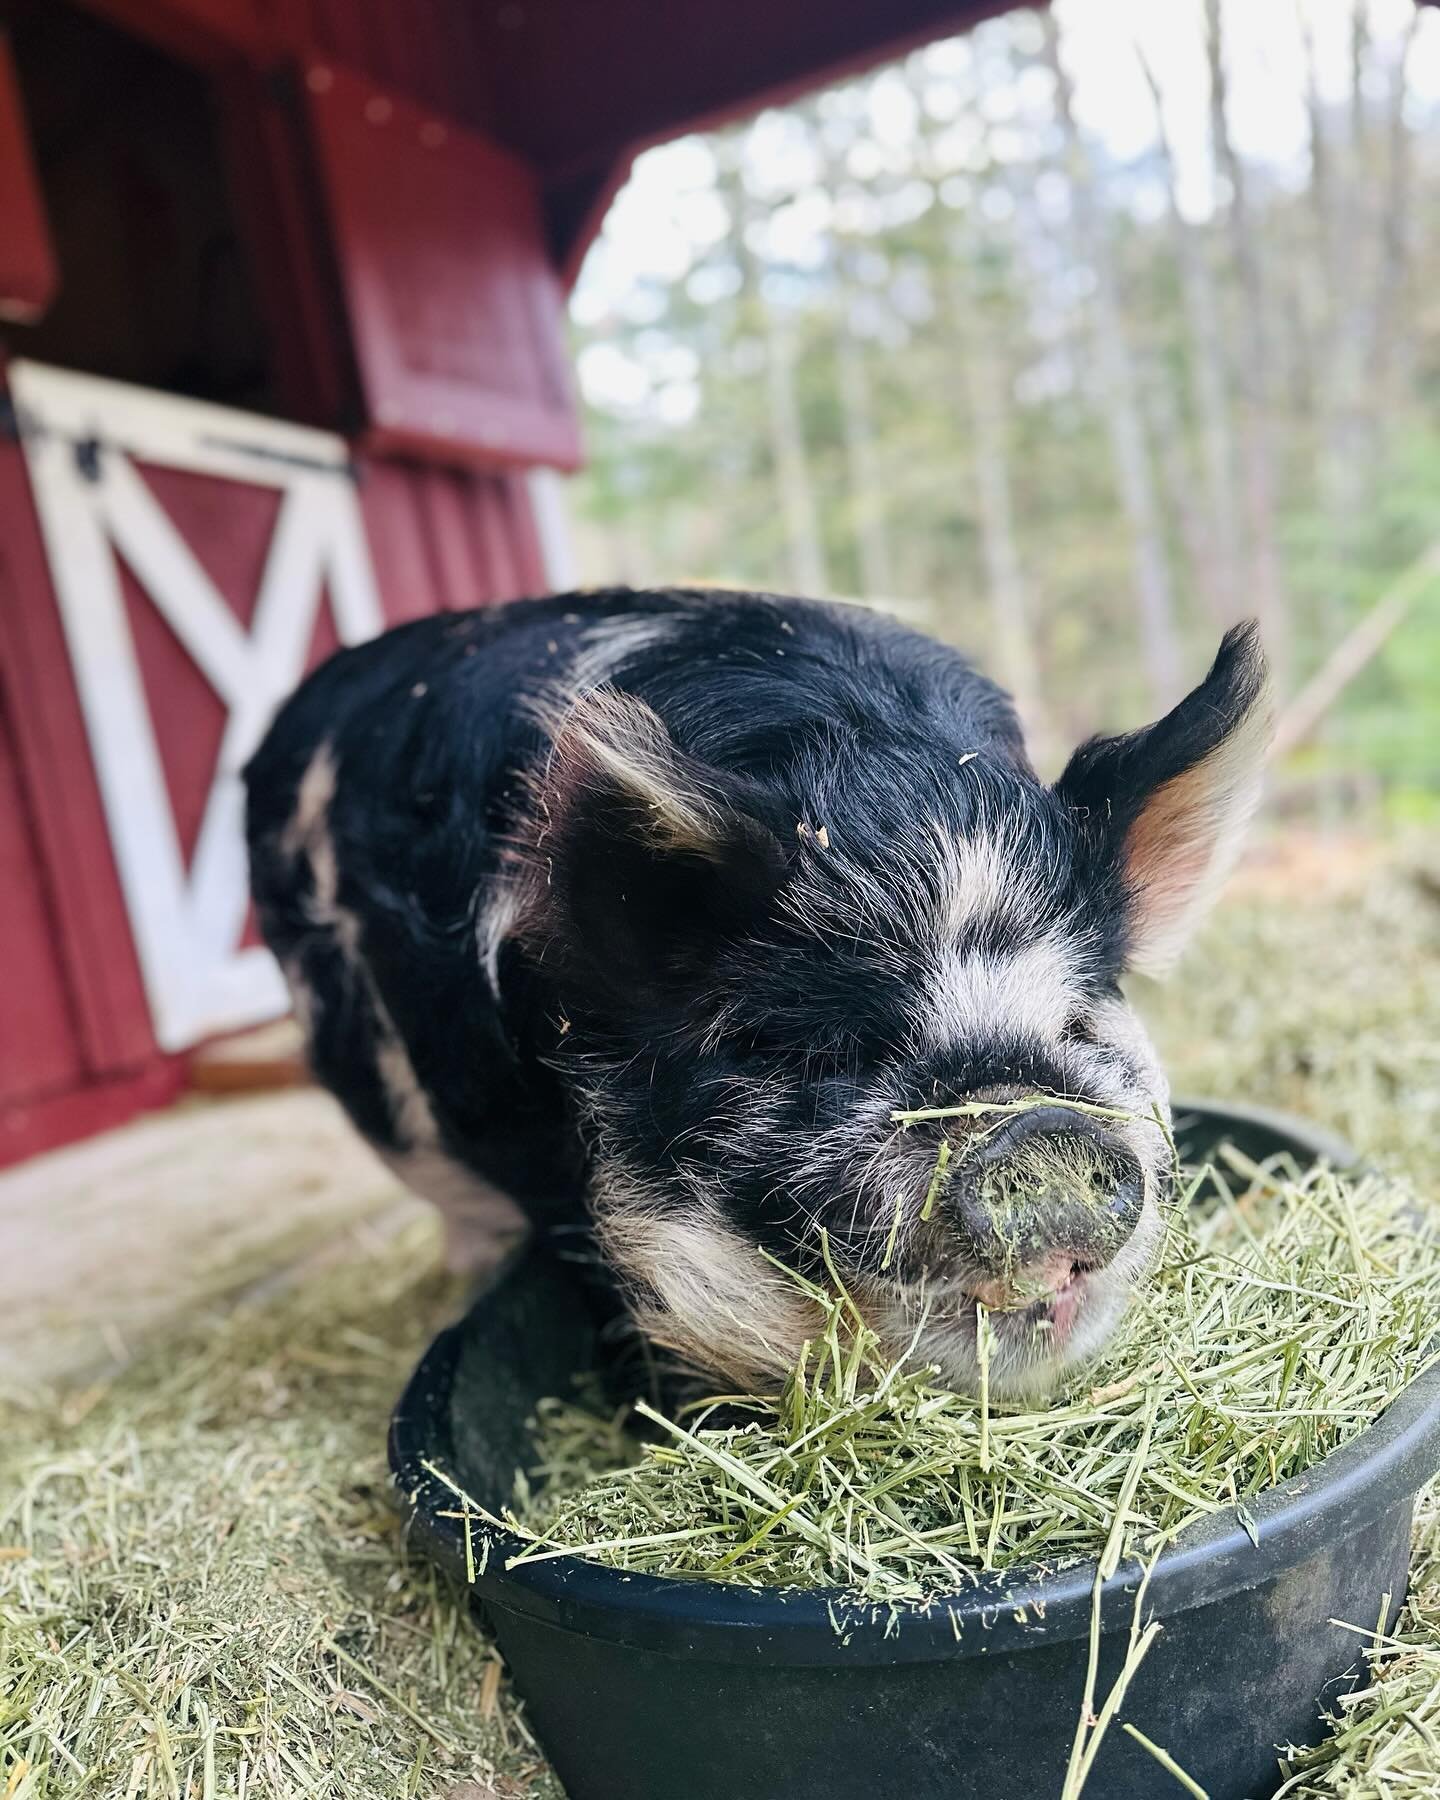 Our precious George is being a wonderful sport about the vets directive. He&rsquo;s incorporating some alfalfa in his daily intake &amp; lessening the amount of roasted sweet potatoes. So far so good 🐽💙